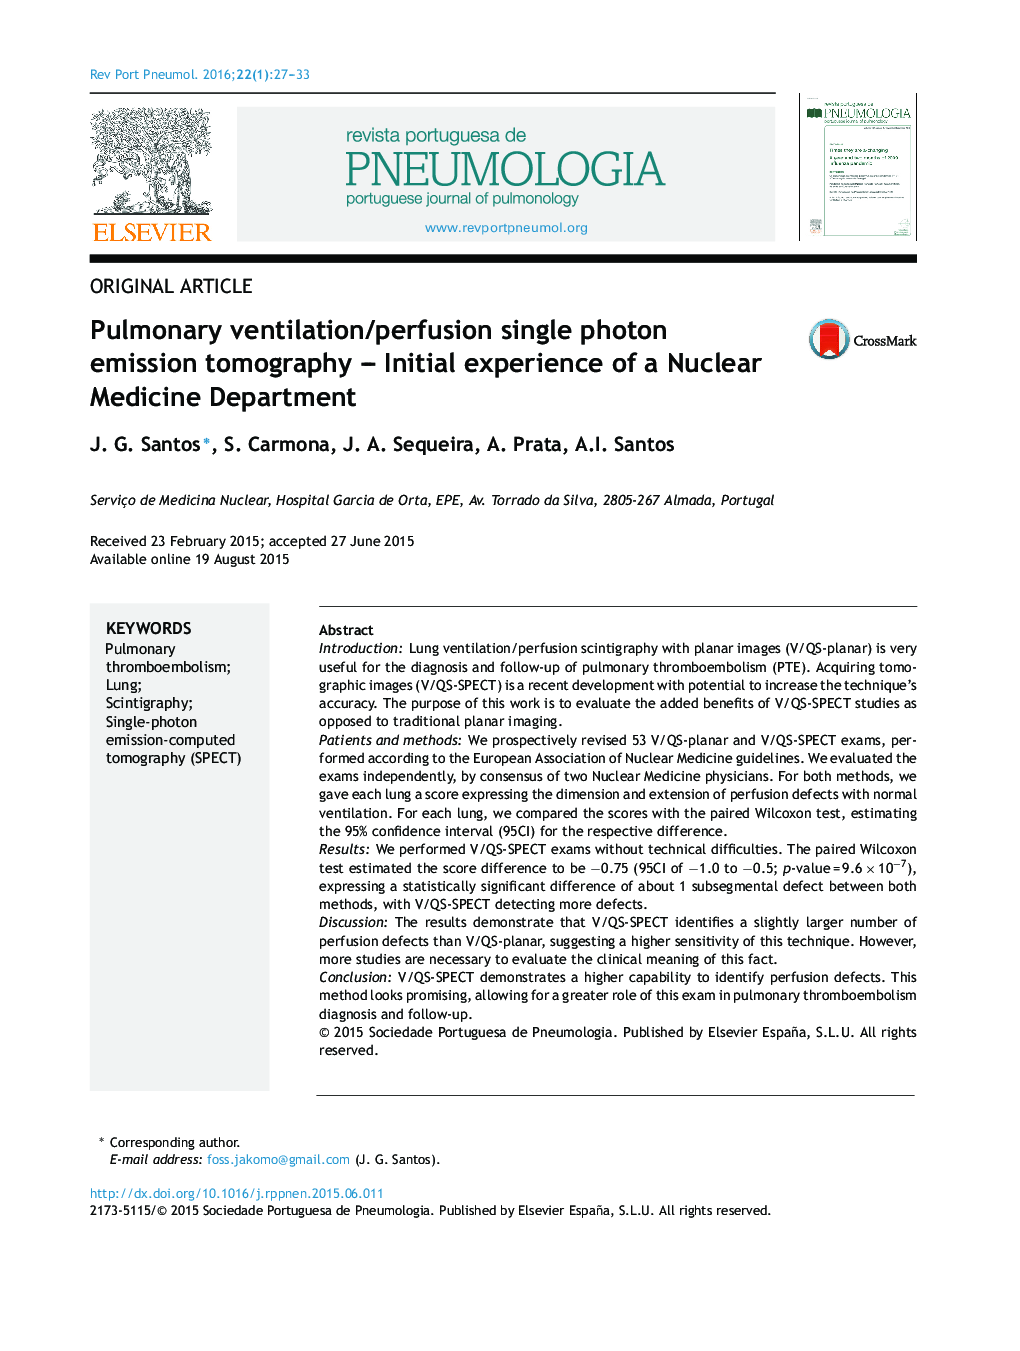 Pulmonary ventilation/perfusion single photon emission tomography – Initial experience of a Nuclear Medicine Department